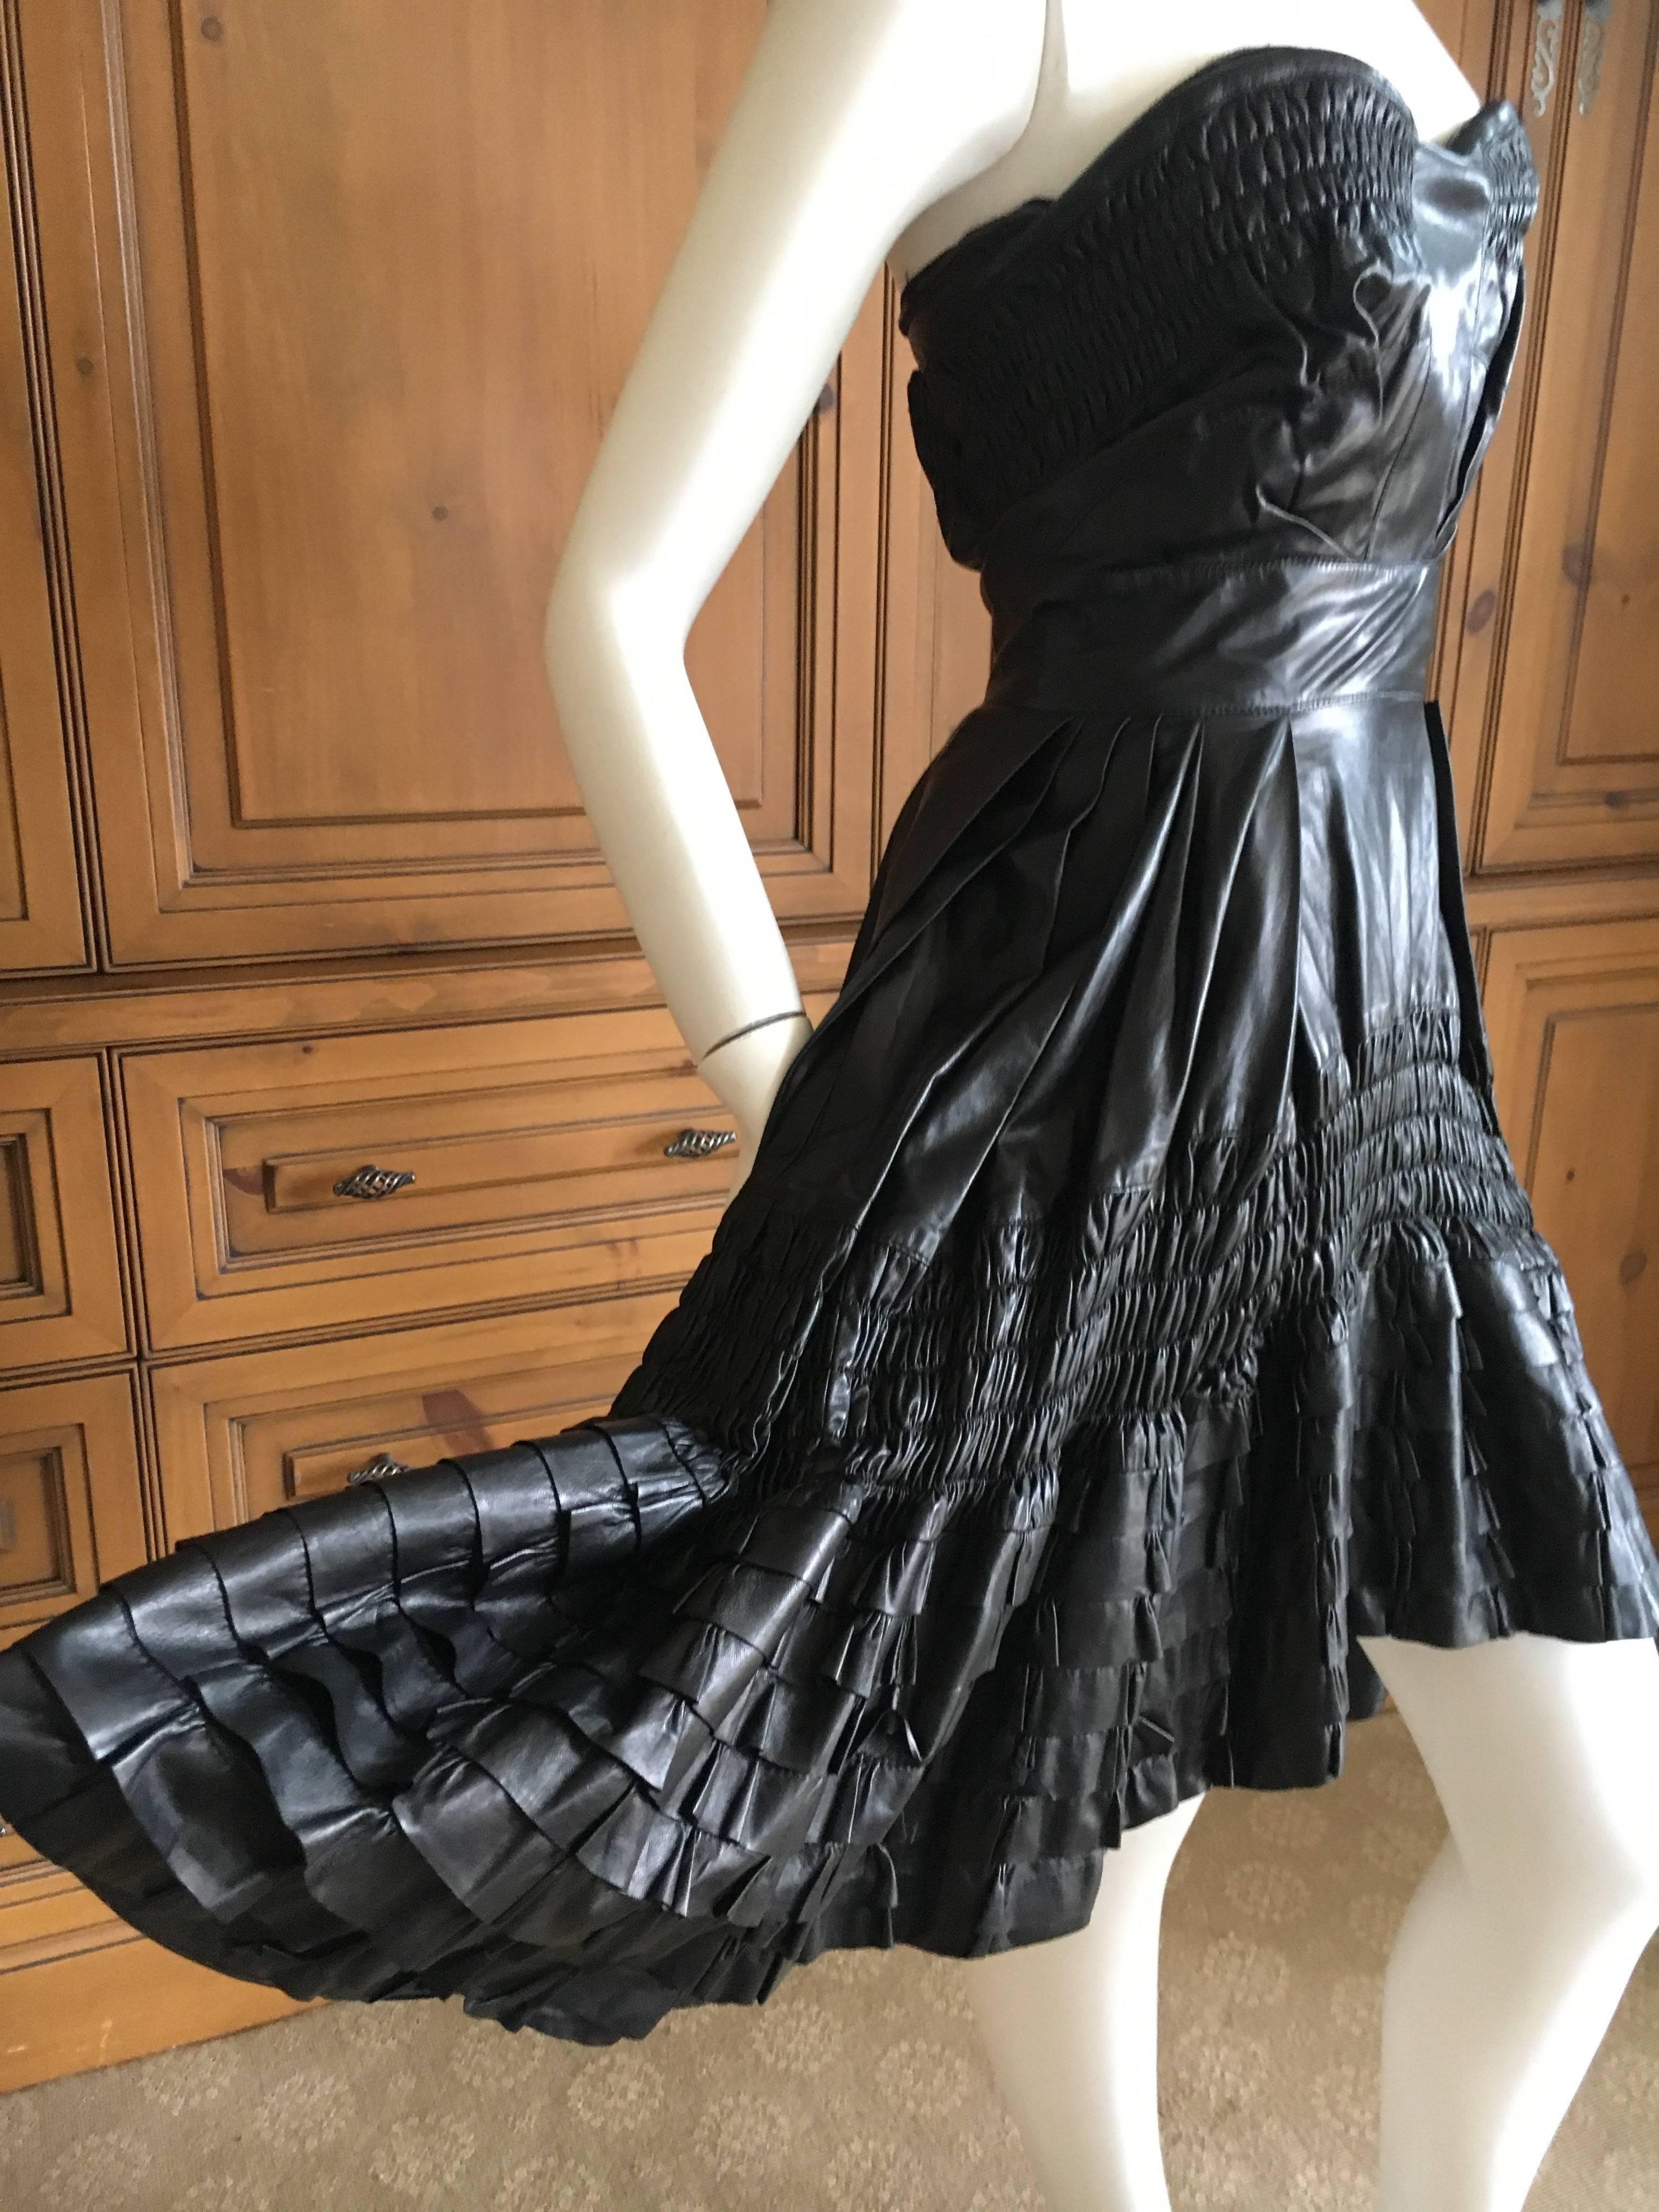 Christian Dior by John Galliano Fall 2010 Black Lambskin Leather Pleated Ruffle Dress.
There is an interior corset attached.
This is so much prettier on a real girl, see runway shot's.
Size 36, there is a lot of stretch in the way this was